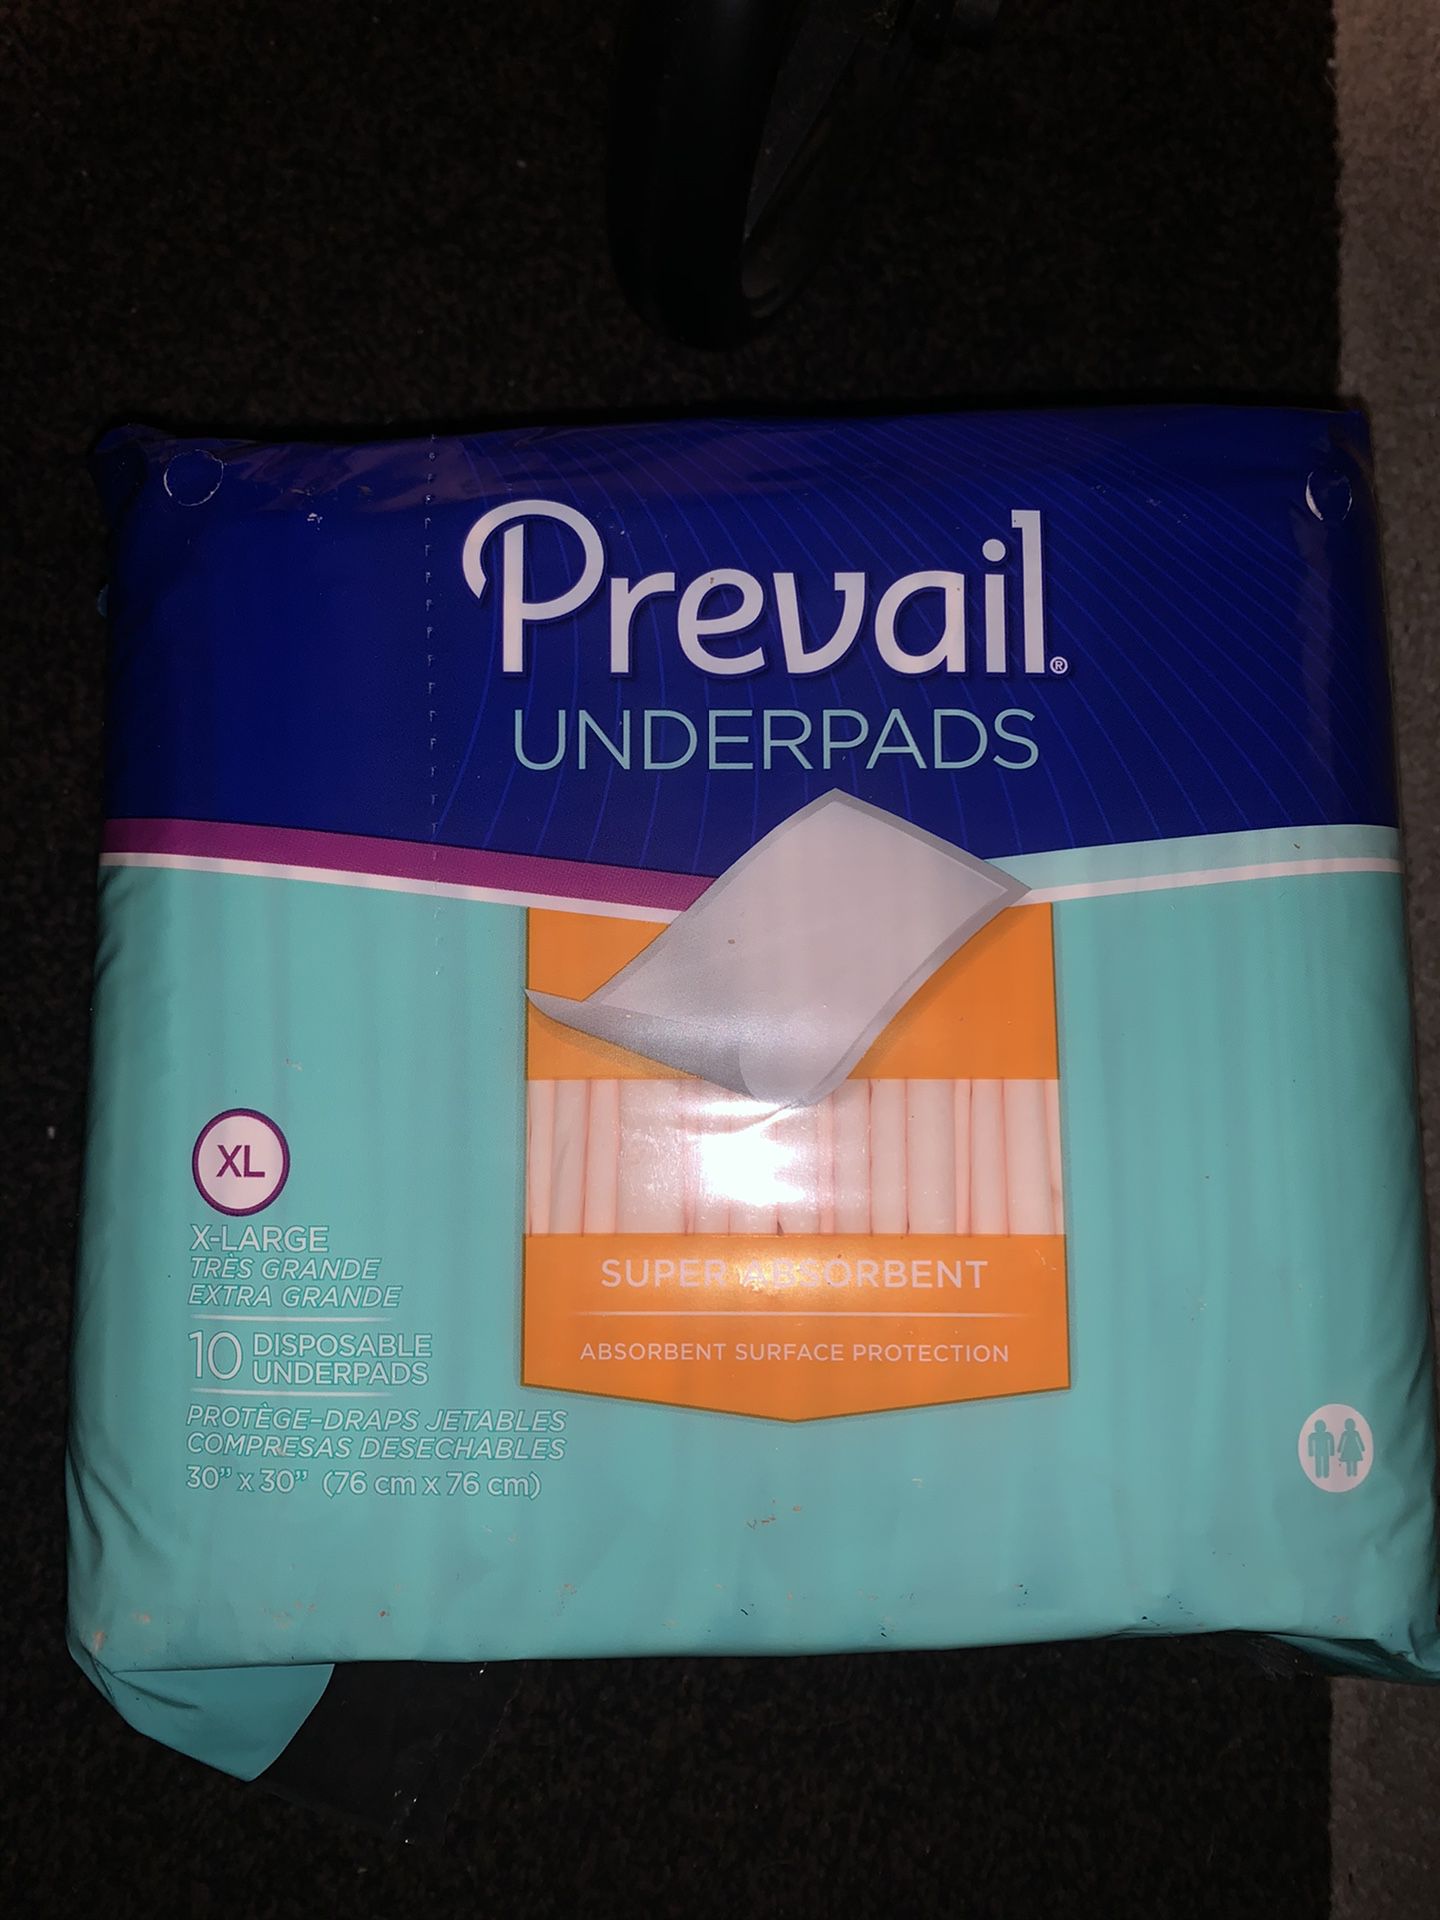 Dog / Human Pee Pads Prevail Underpad XL 10 in Each Package